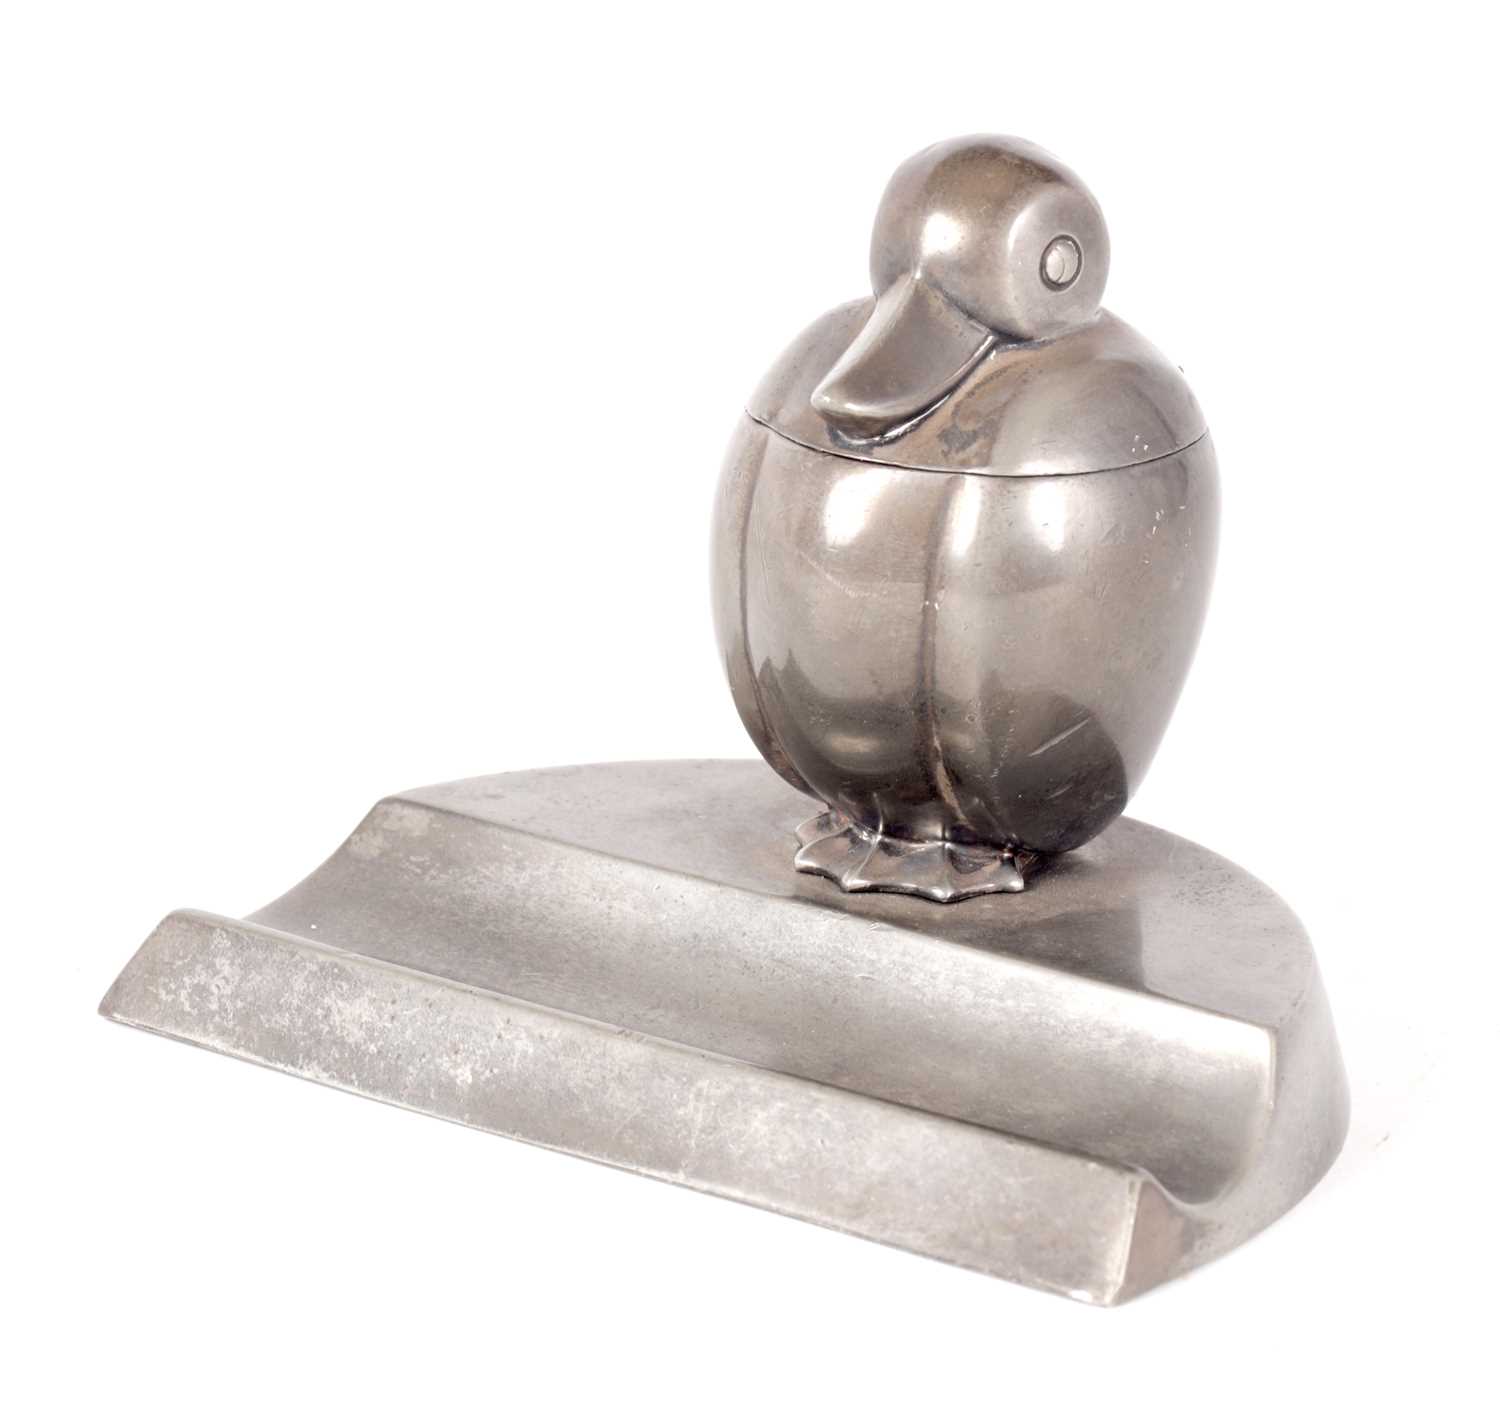 AN UNUSUAL WMF NOVELTY PEWTER INKSTAND